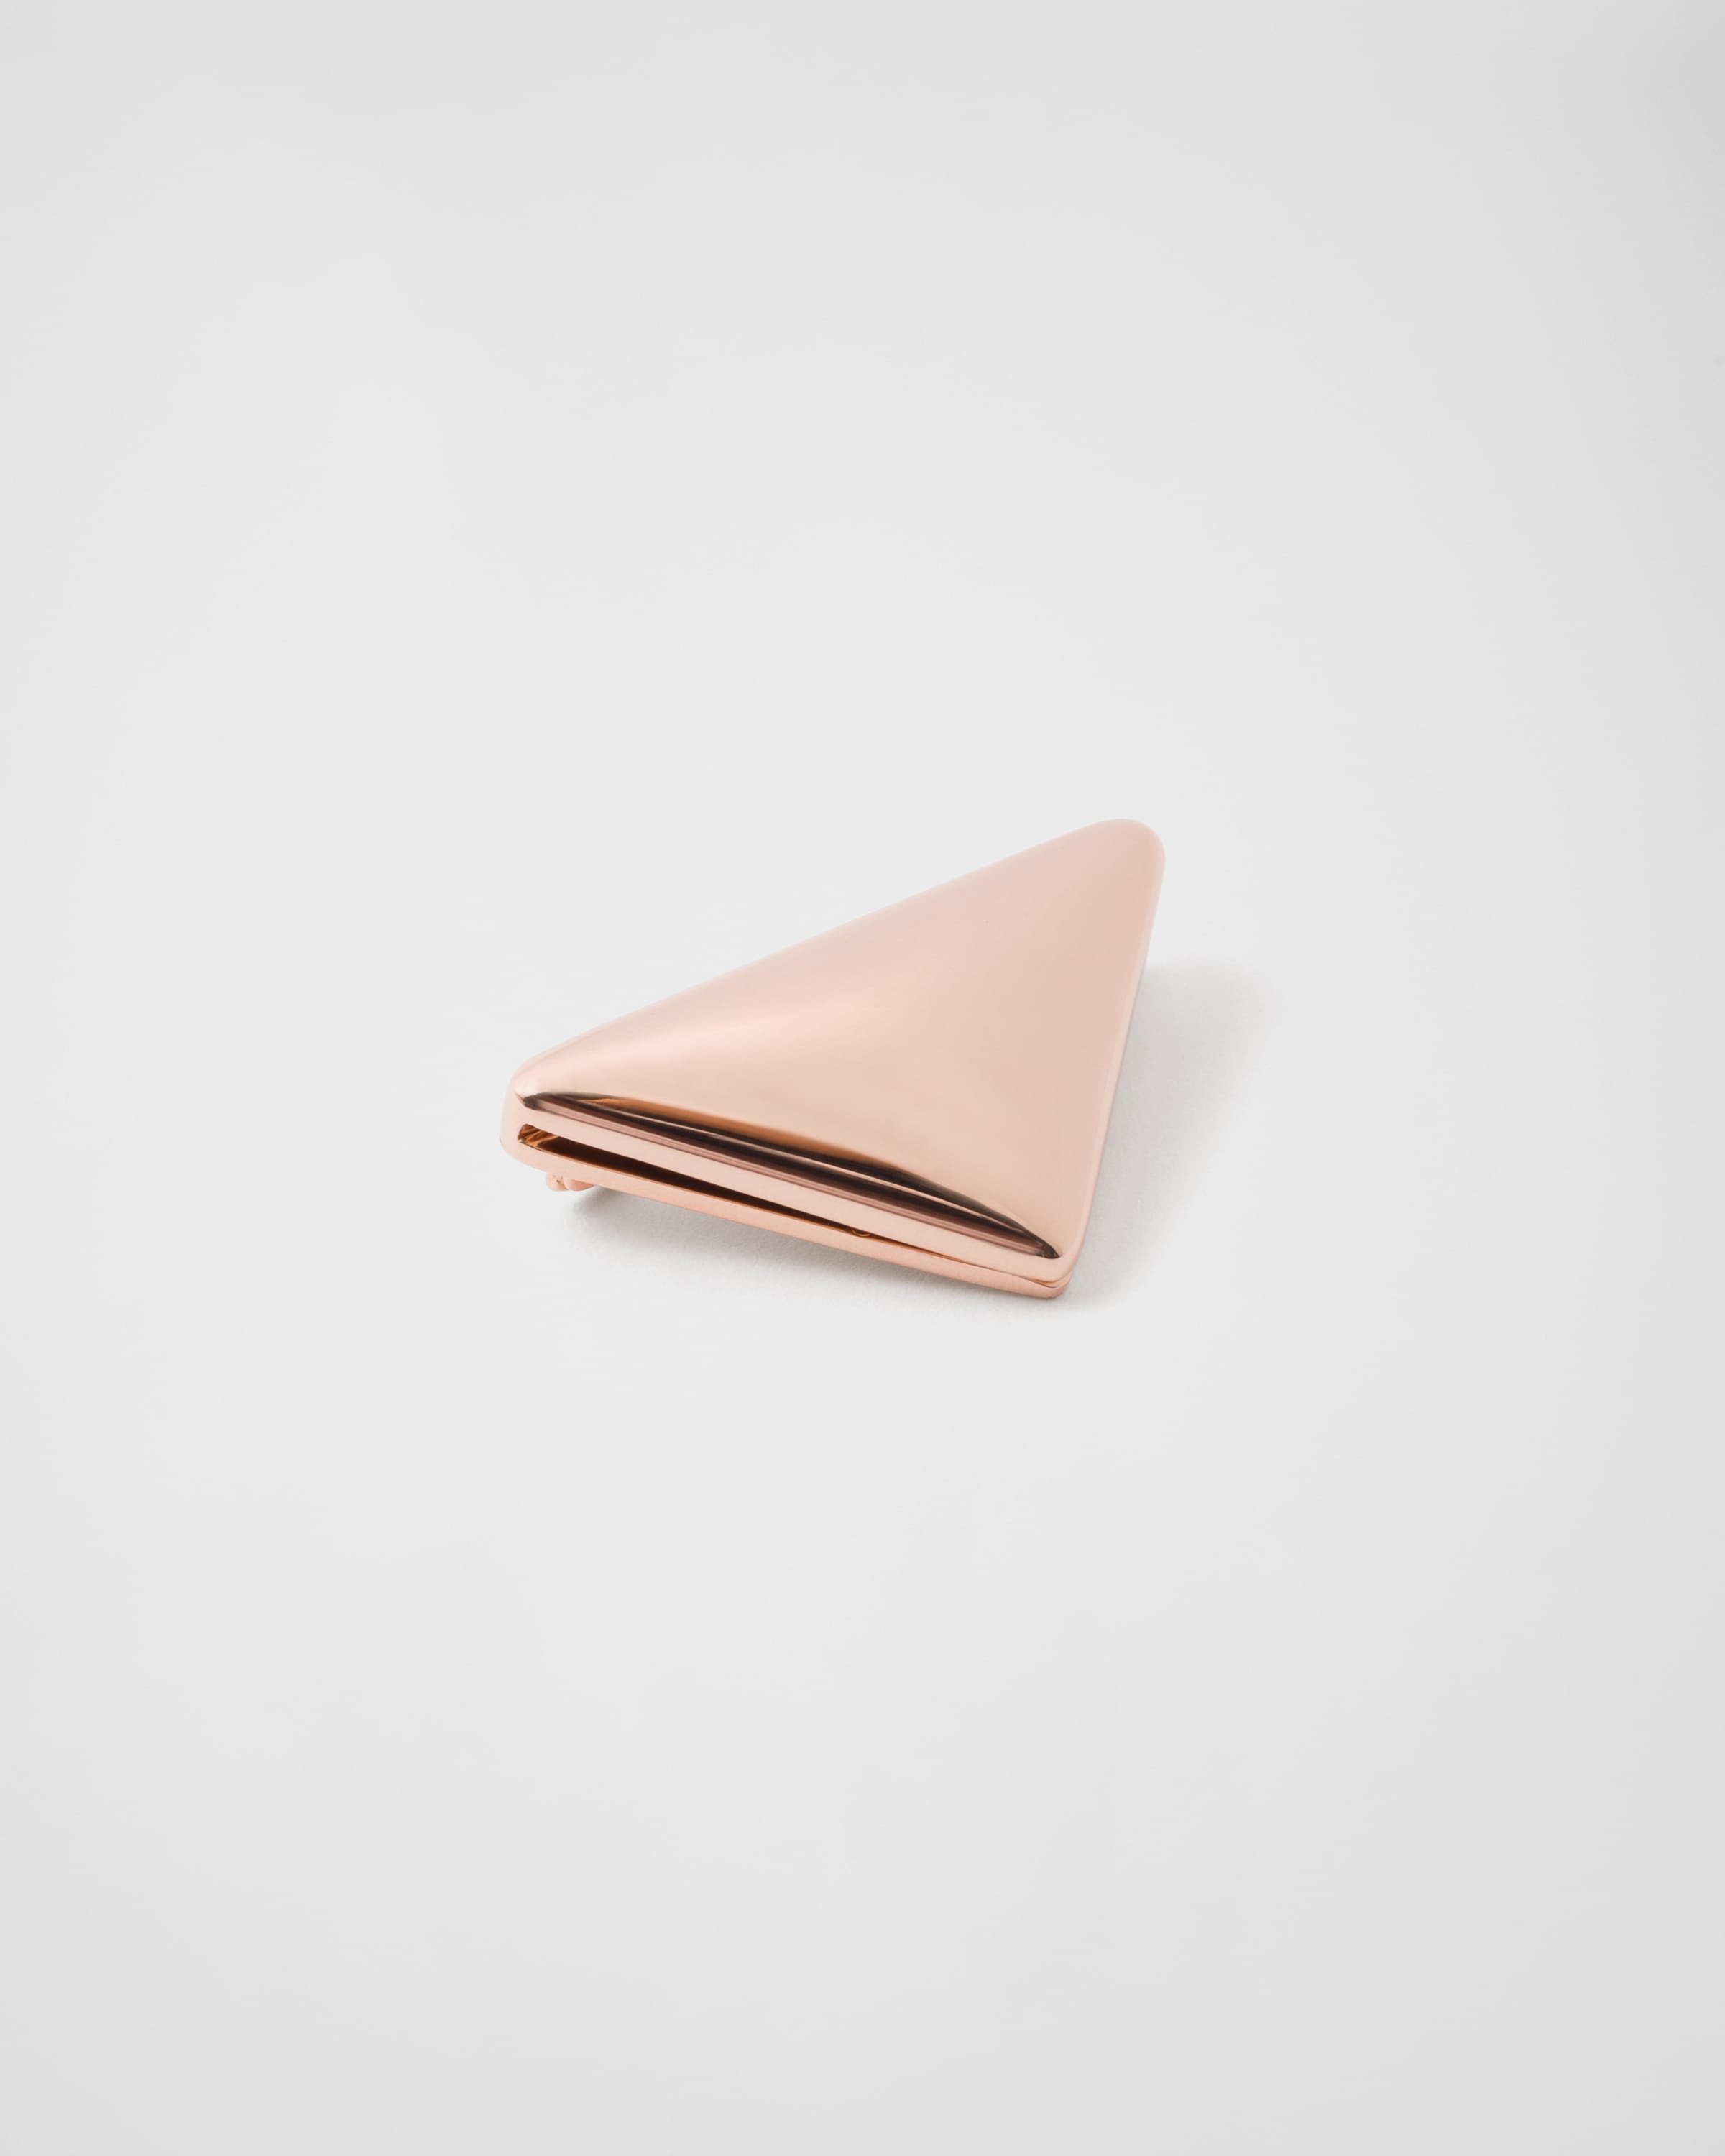 Eternal Gold small triangle brooch in pink gold - 4